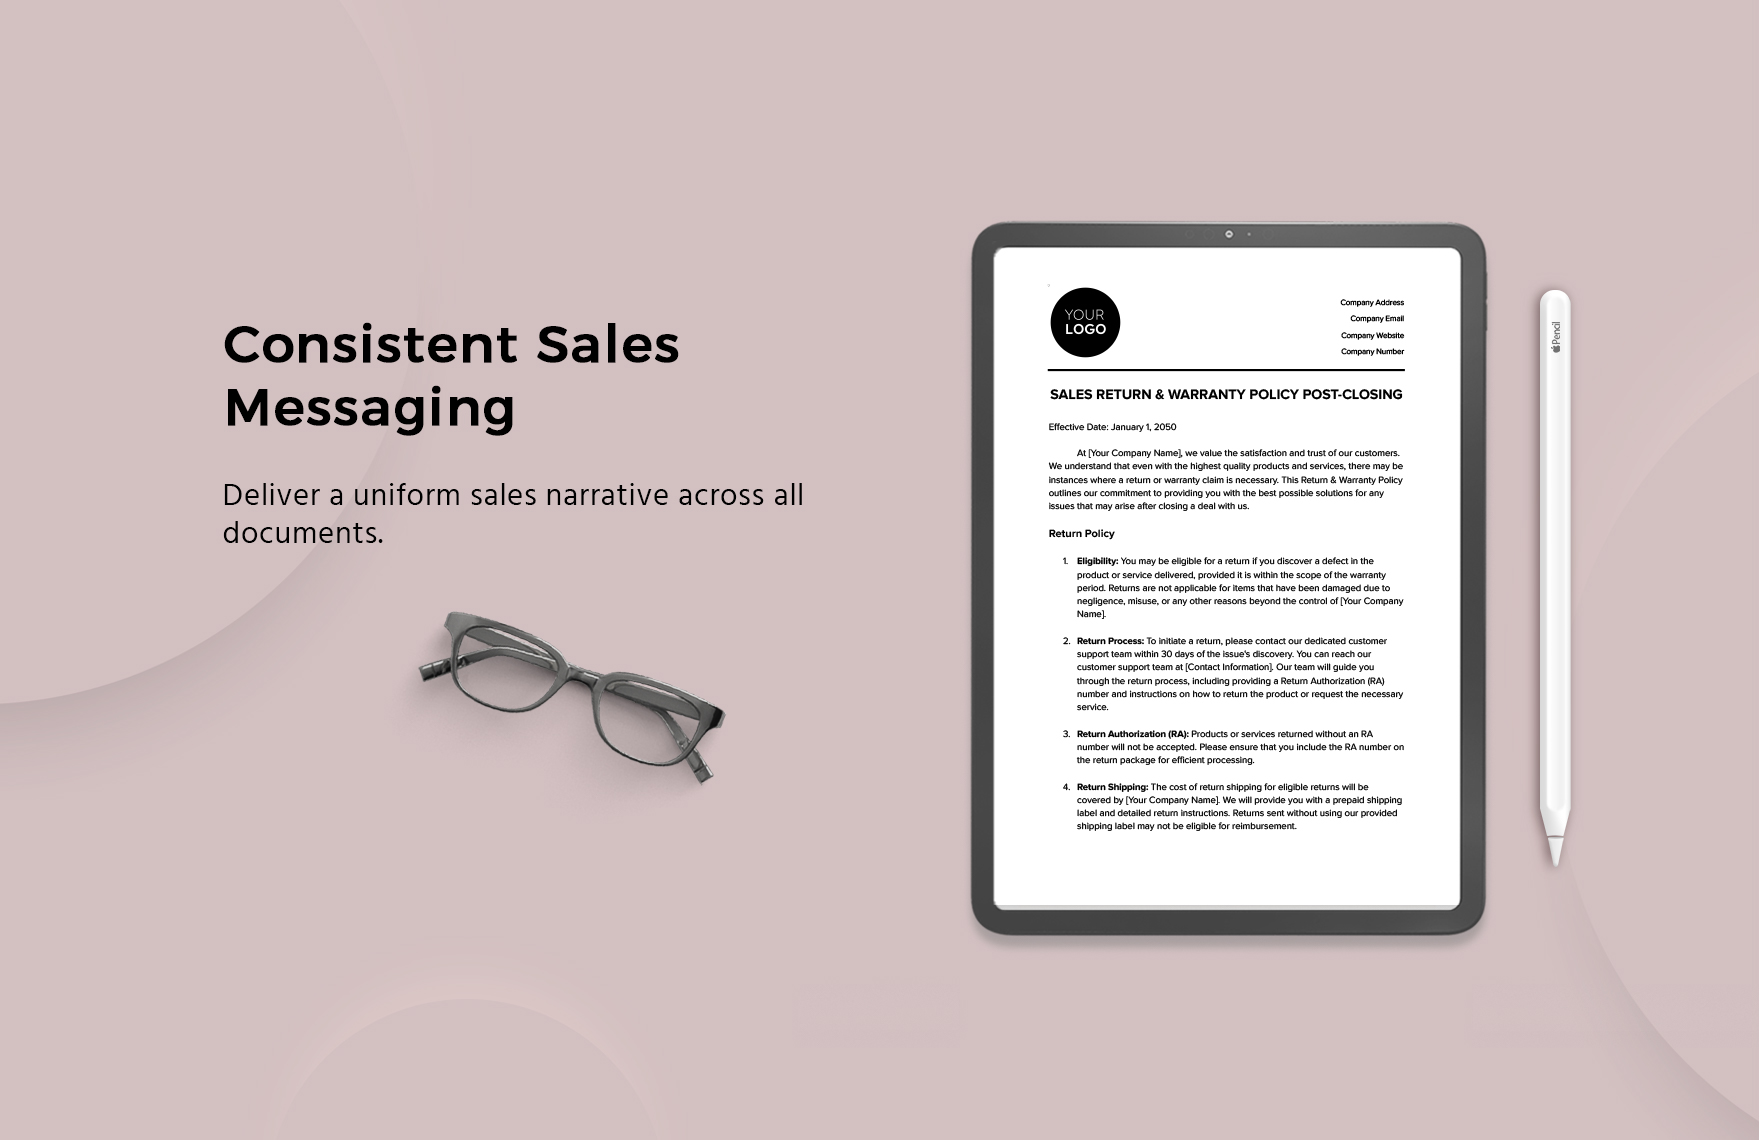 Sales Return & Warranty Policy Post-Closing Template